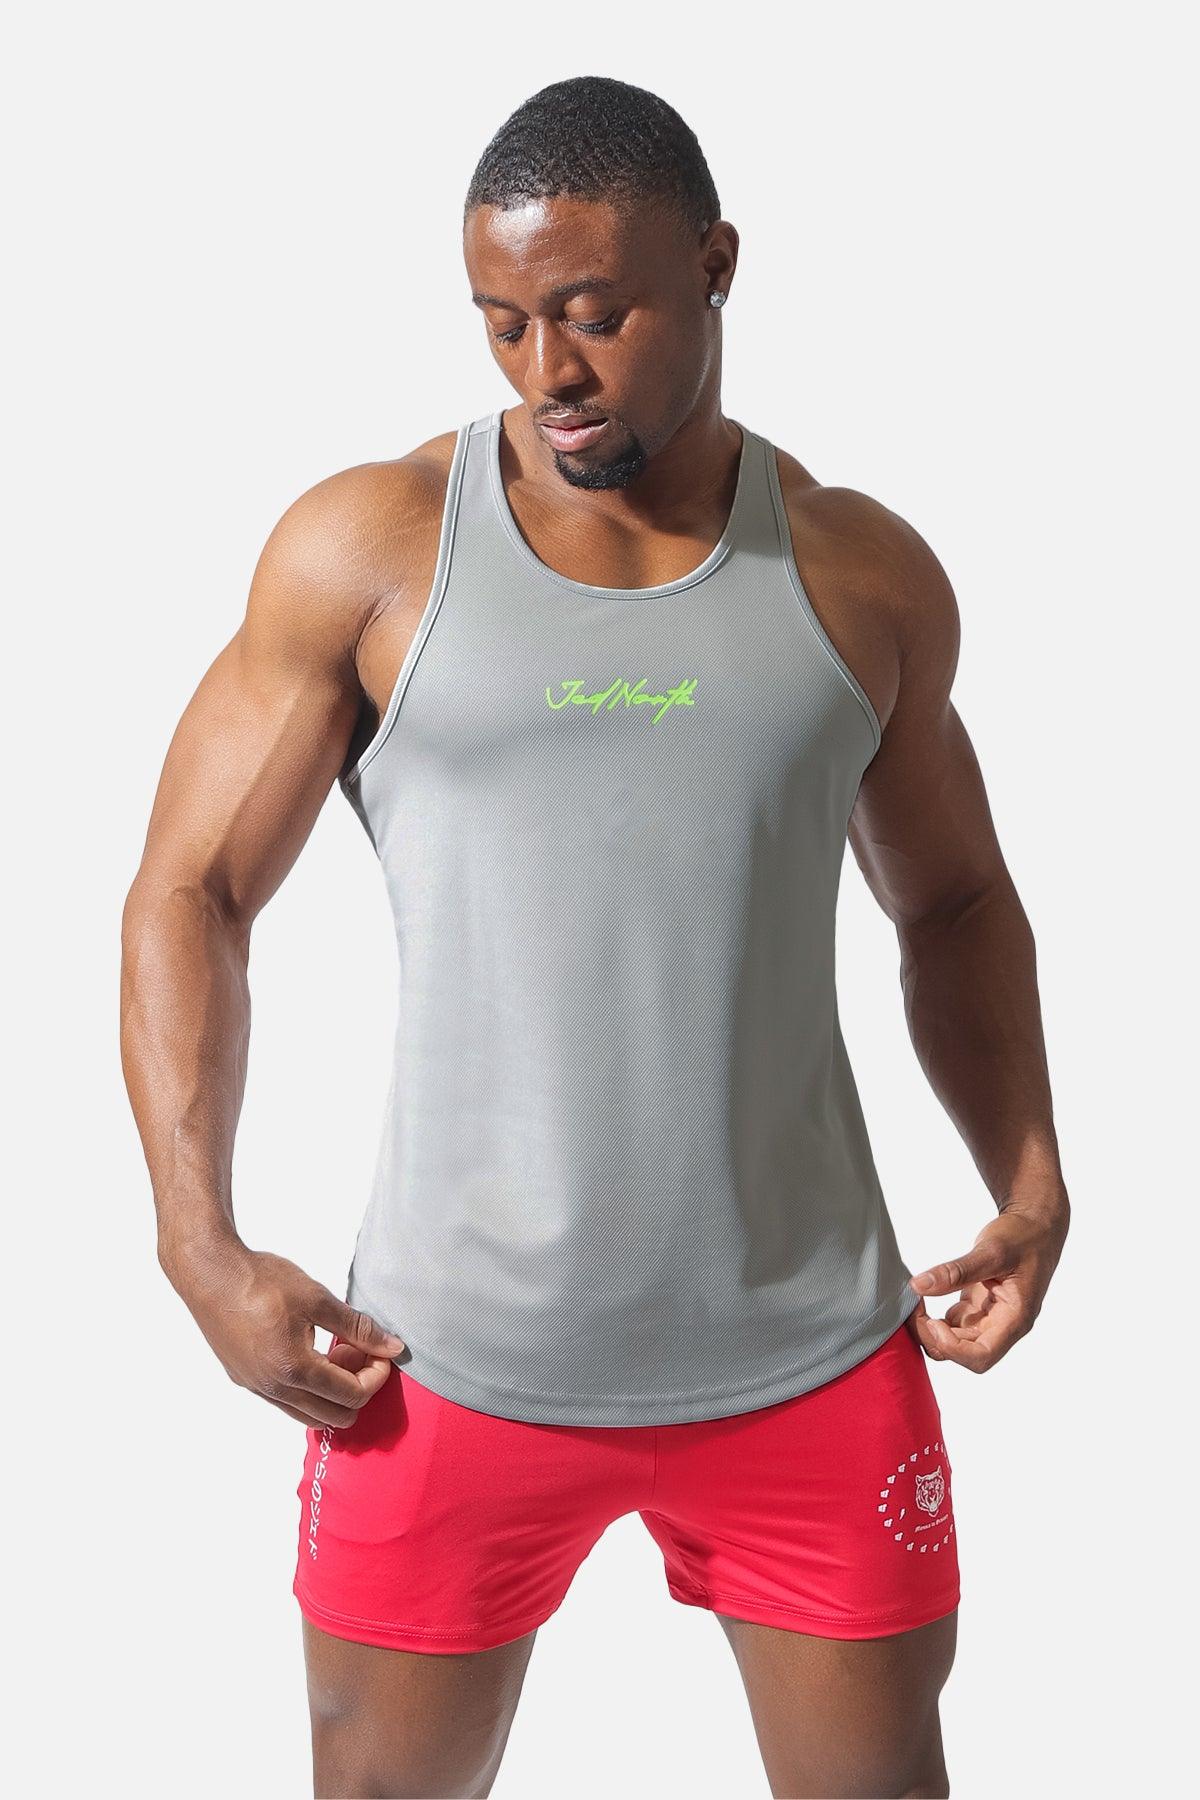 Fast-Dry Bodybuilding Workout Stringer - Light Gray Neon - Jed North